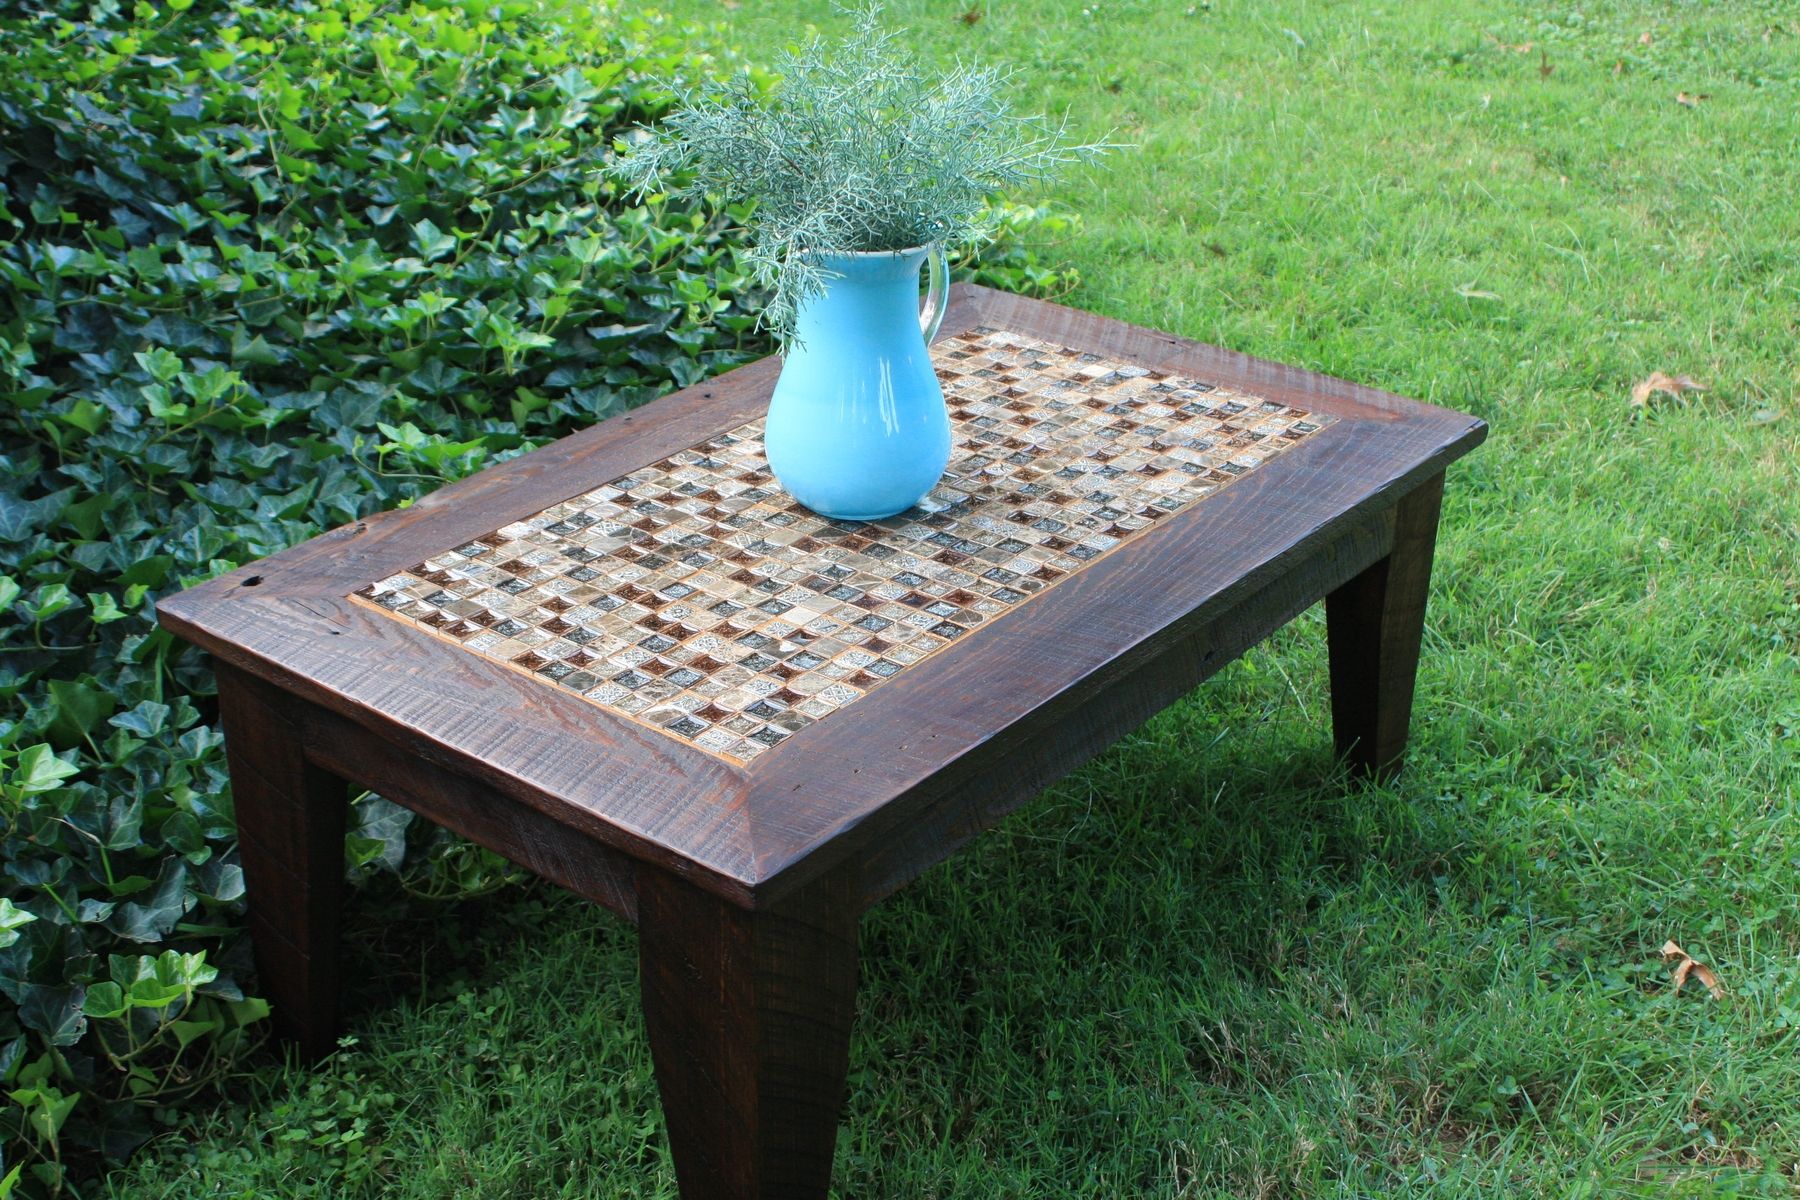 hand made coffee table glass stone tile mosaic reclaimed wood outdoor accent custom rustic contemporary slim mirror small blue lamp deck umbrella chests and consoles furniture